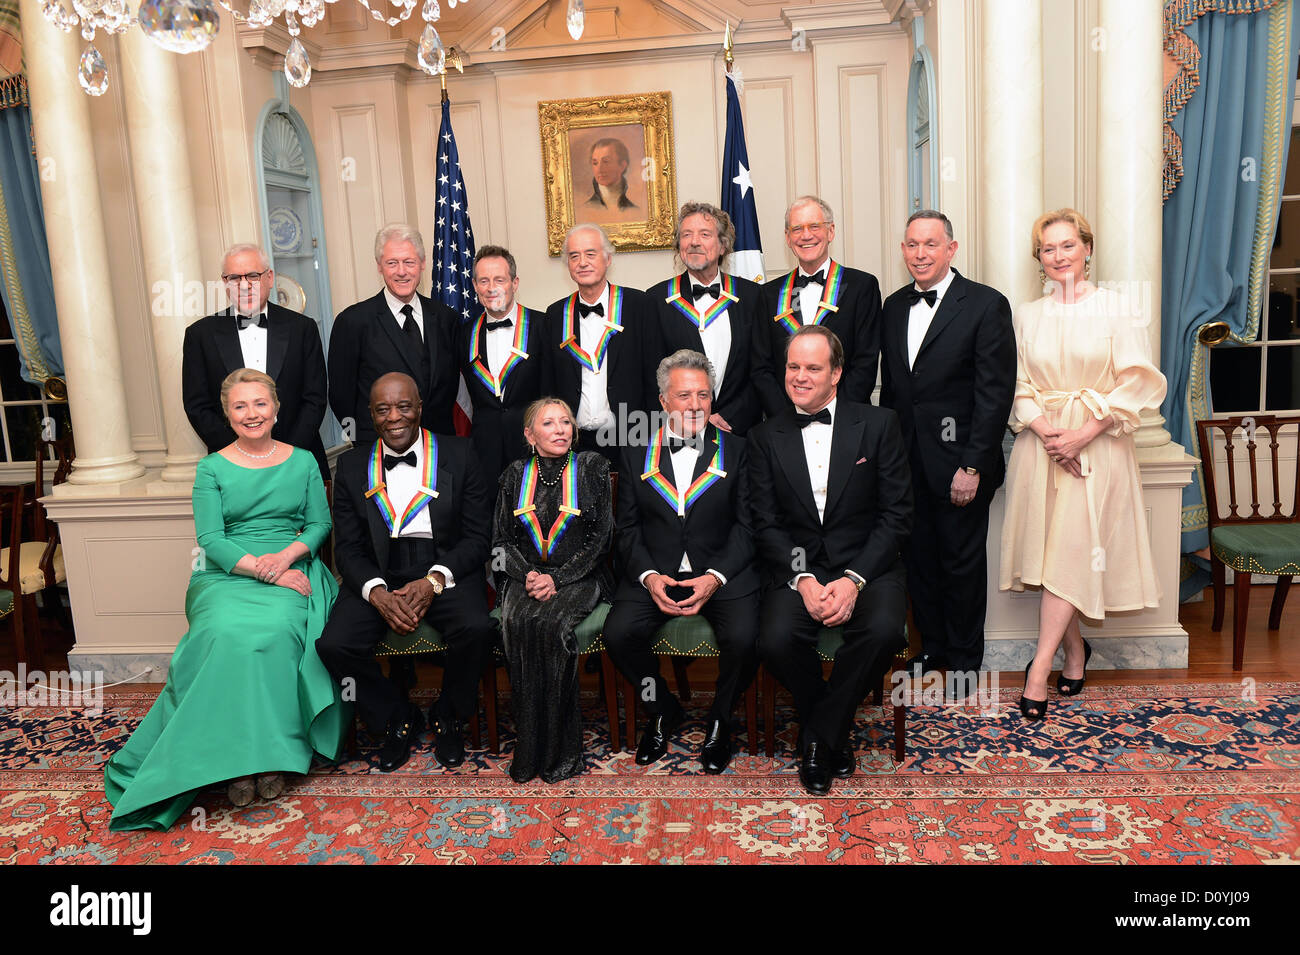 Kennedy Center Honorees. (L-R Back Row) Chairman of the John F. Kennedy Center for the Performing Arts, David M. Rubenstein, former US President Bill Clinton, John Paul Jones, Jimmy Page, Robert Plant, David Letterman, President of the John F. Kennedy Center for the Performing Arts Michael M. Kaiser and Meryl Streep. (L-R Front Row) US Secretary of State Hillary Rodham Clinton, Buddy Guy, Natalia Makarova, Dustin Hoffman and Michael Stevens, producer of the annual Kennedy Center Honors following a dinner for Kennedy honorees hosted by U.S. Secretary of State Hillary Rodham Clinton at the U.S. Stock Photo